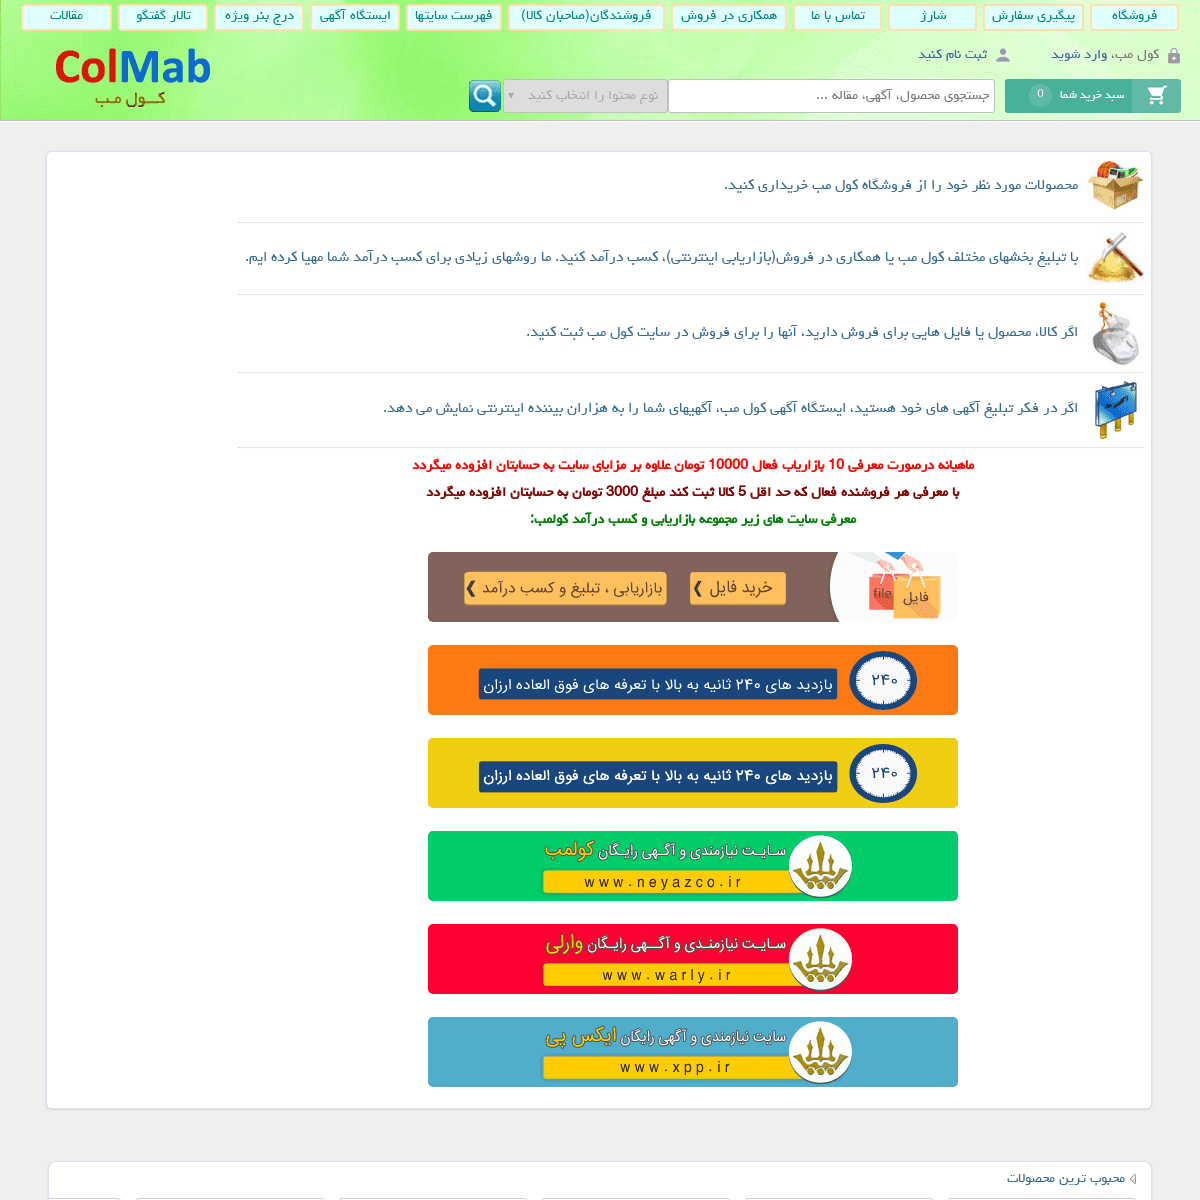 A complete backup of colmab.com